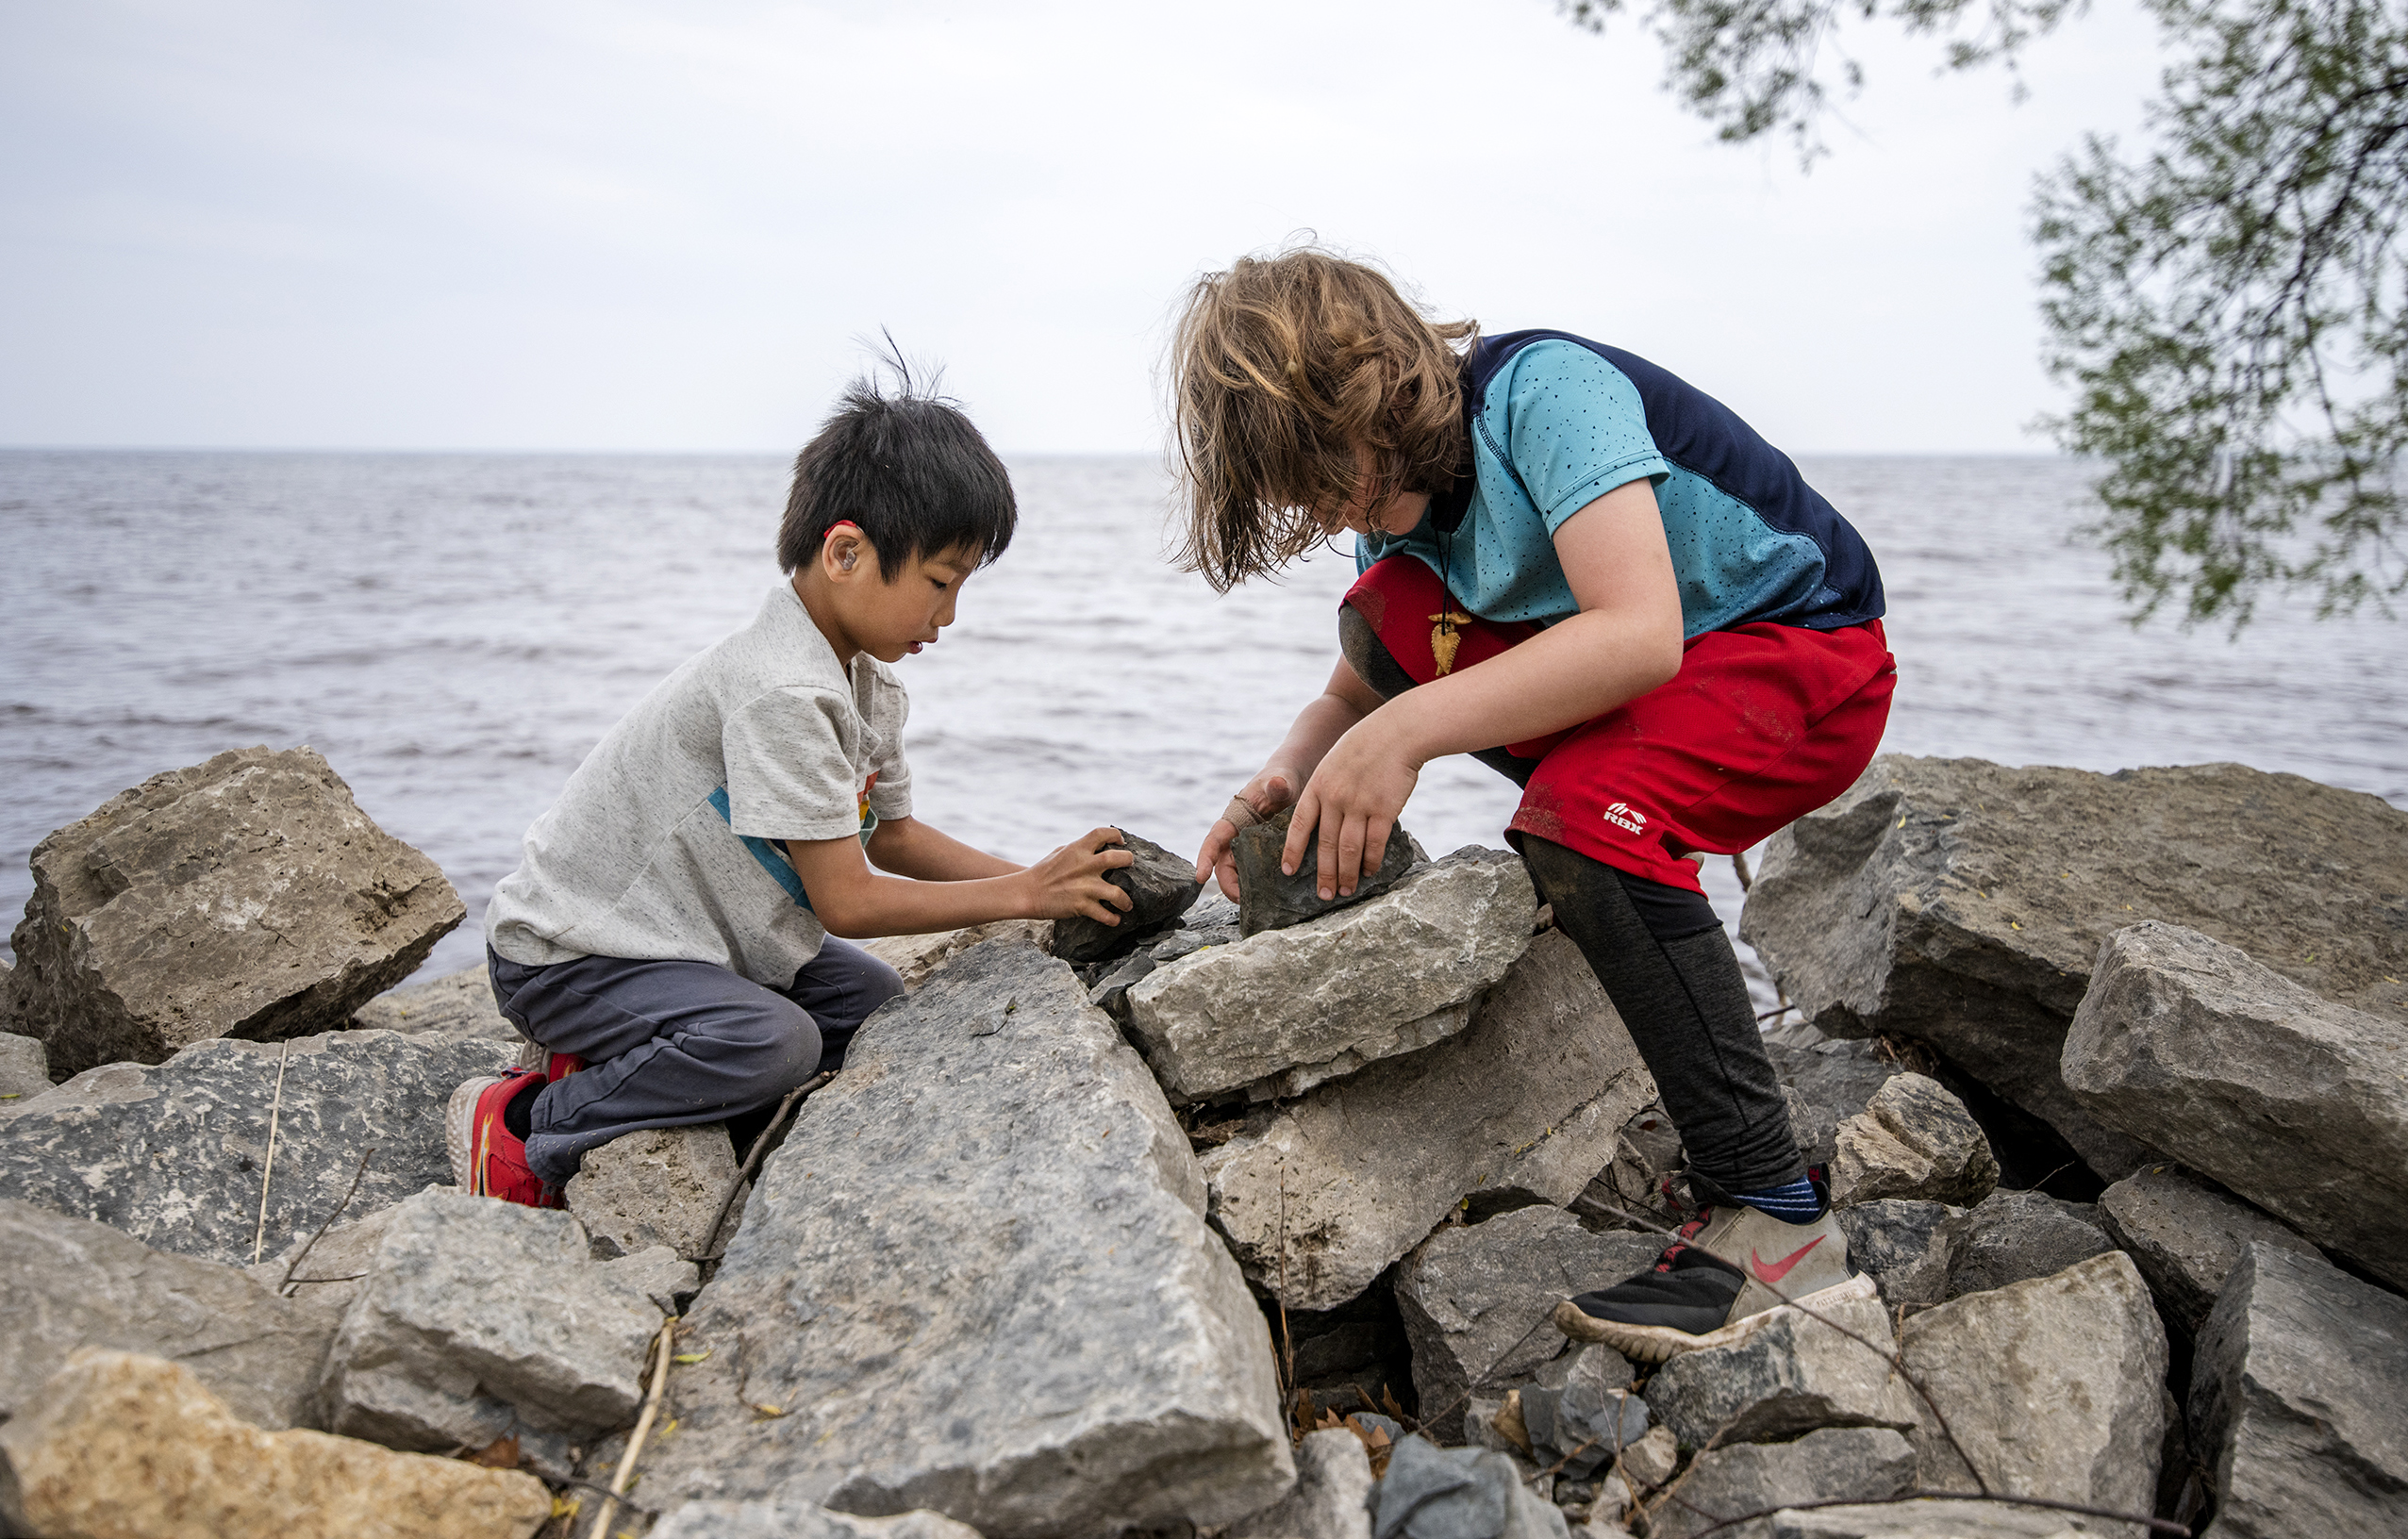 Two children play on tall rocks near the water.